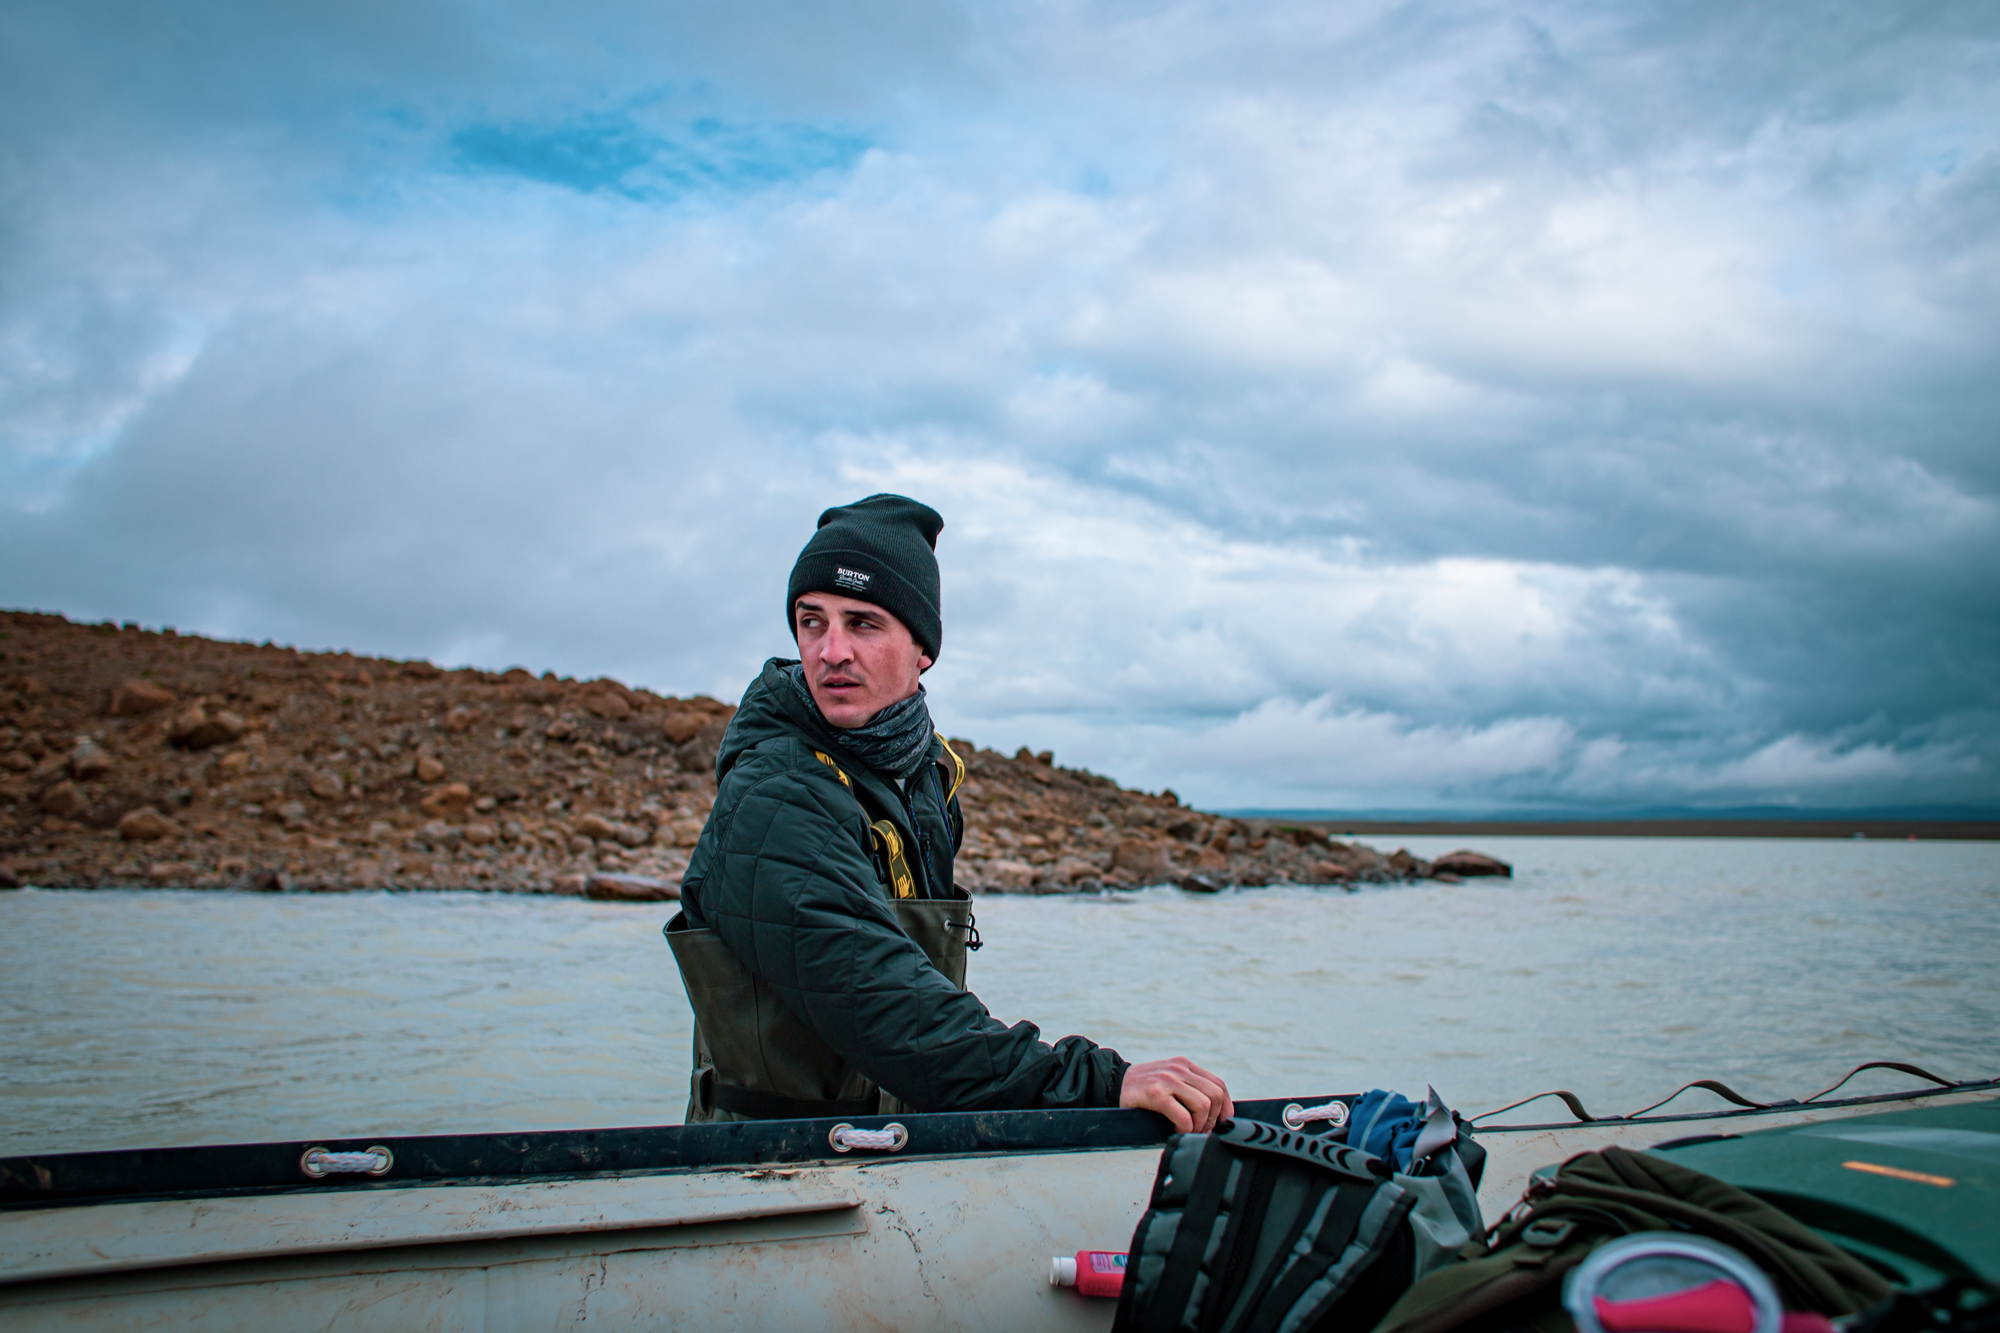 Dr. Michael Thorpe turns to look over his shoulder as he stands in water against a cloudy gray-blue sky. He wears a dark green stocking cap and a dark green quilted jacket underneath dark green waders, or waterproof overalls. His right hand rests on the side of a small boat with backpacks sitting on its top. A rocky brown coastline extends into the image behind him, and the clouds hang low over a dark blue horizon far off in the distance.